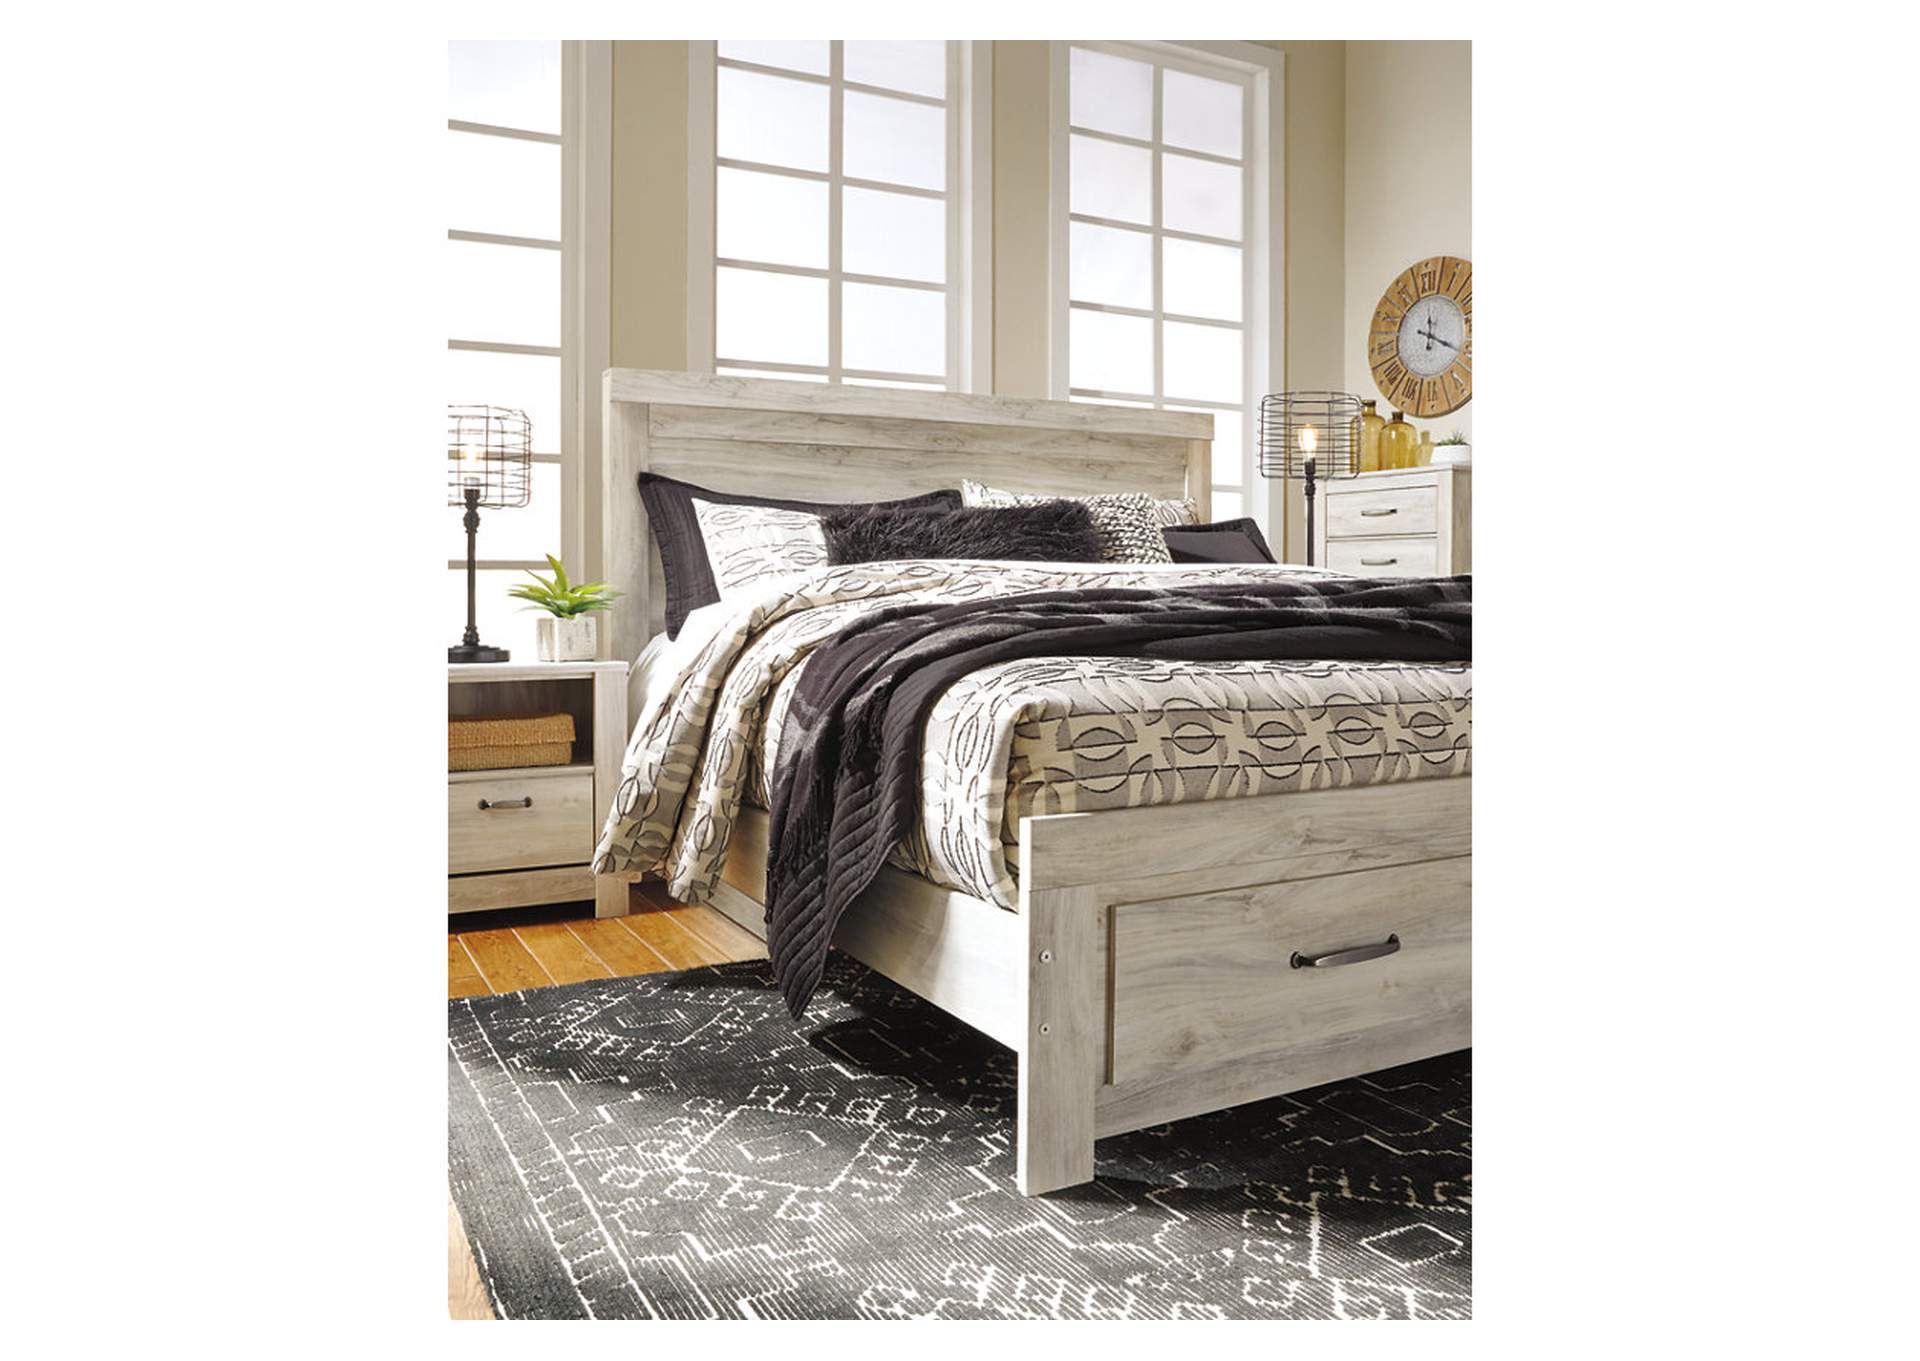 Bellaby Queen Panel Bed with 2 Nightstands,Signature Design By Ashley